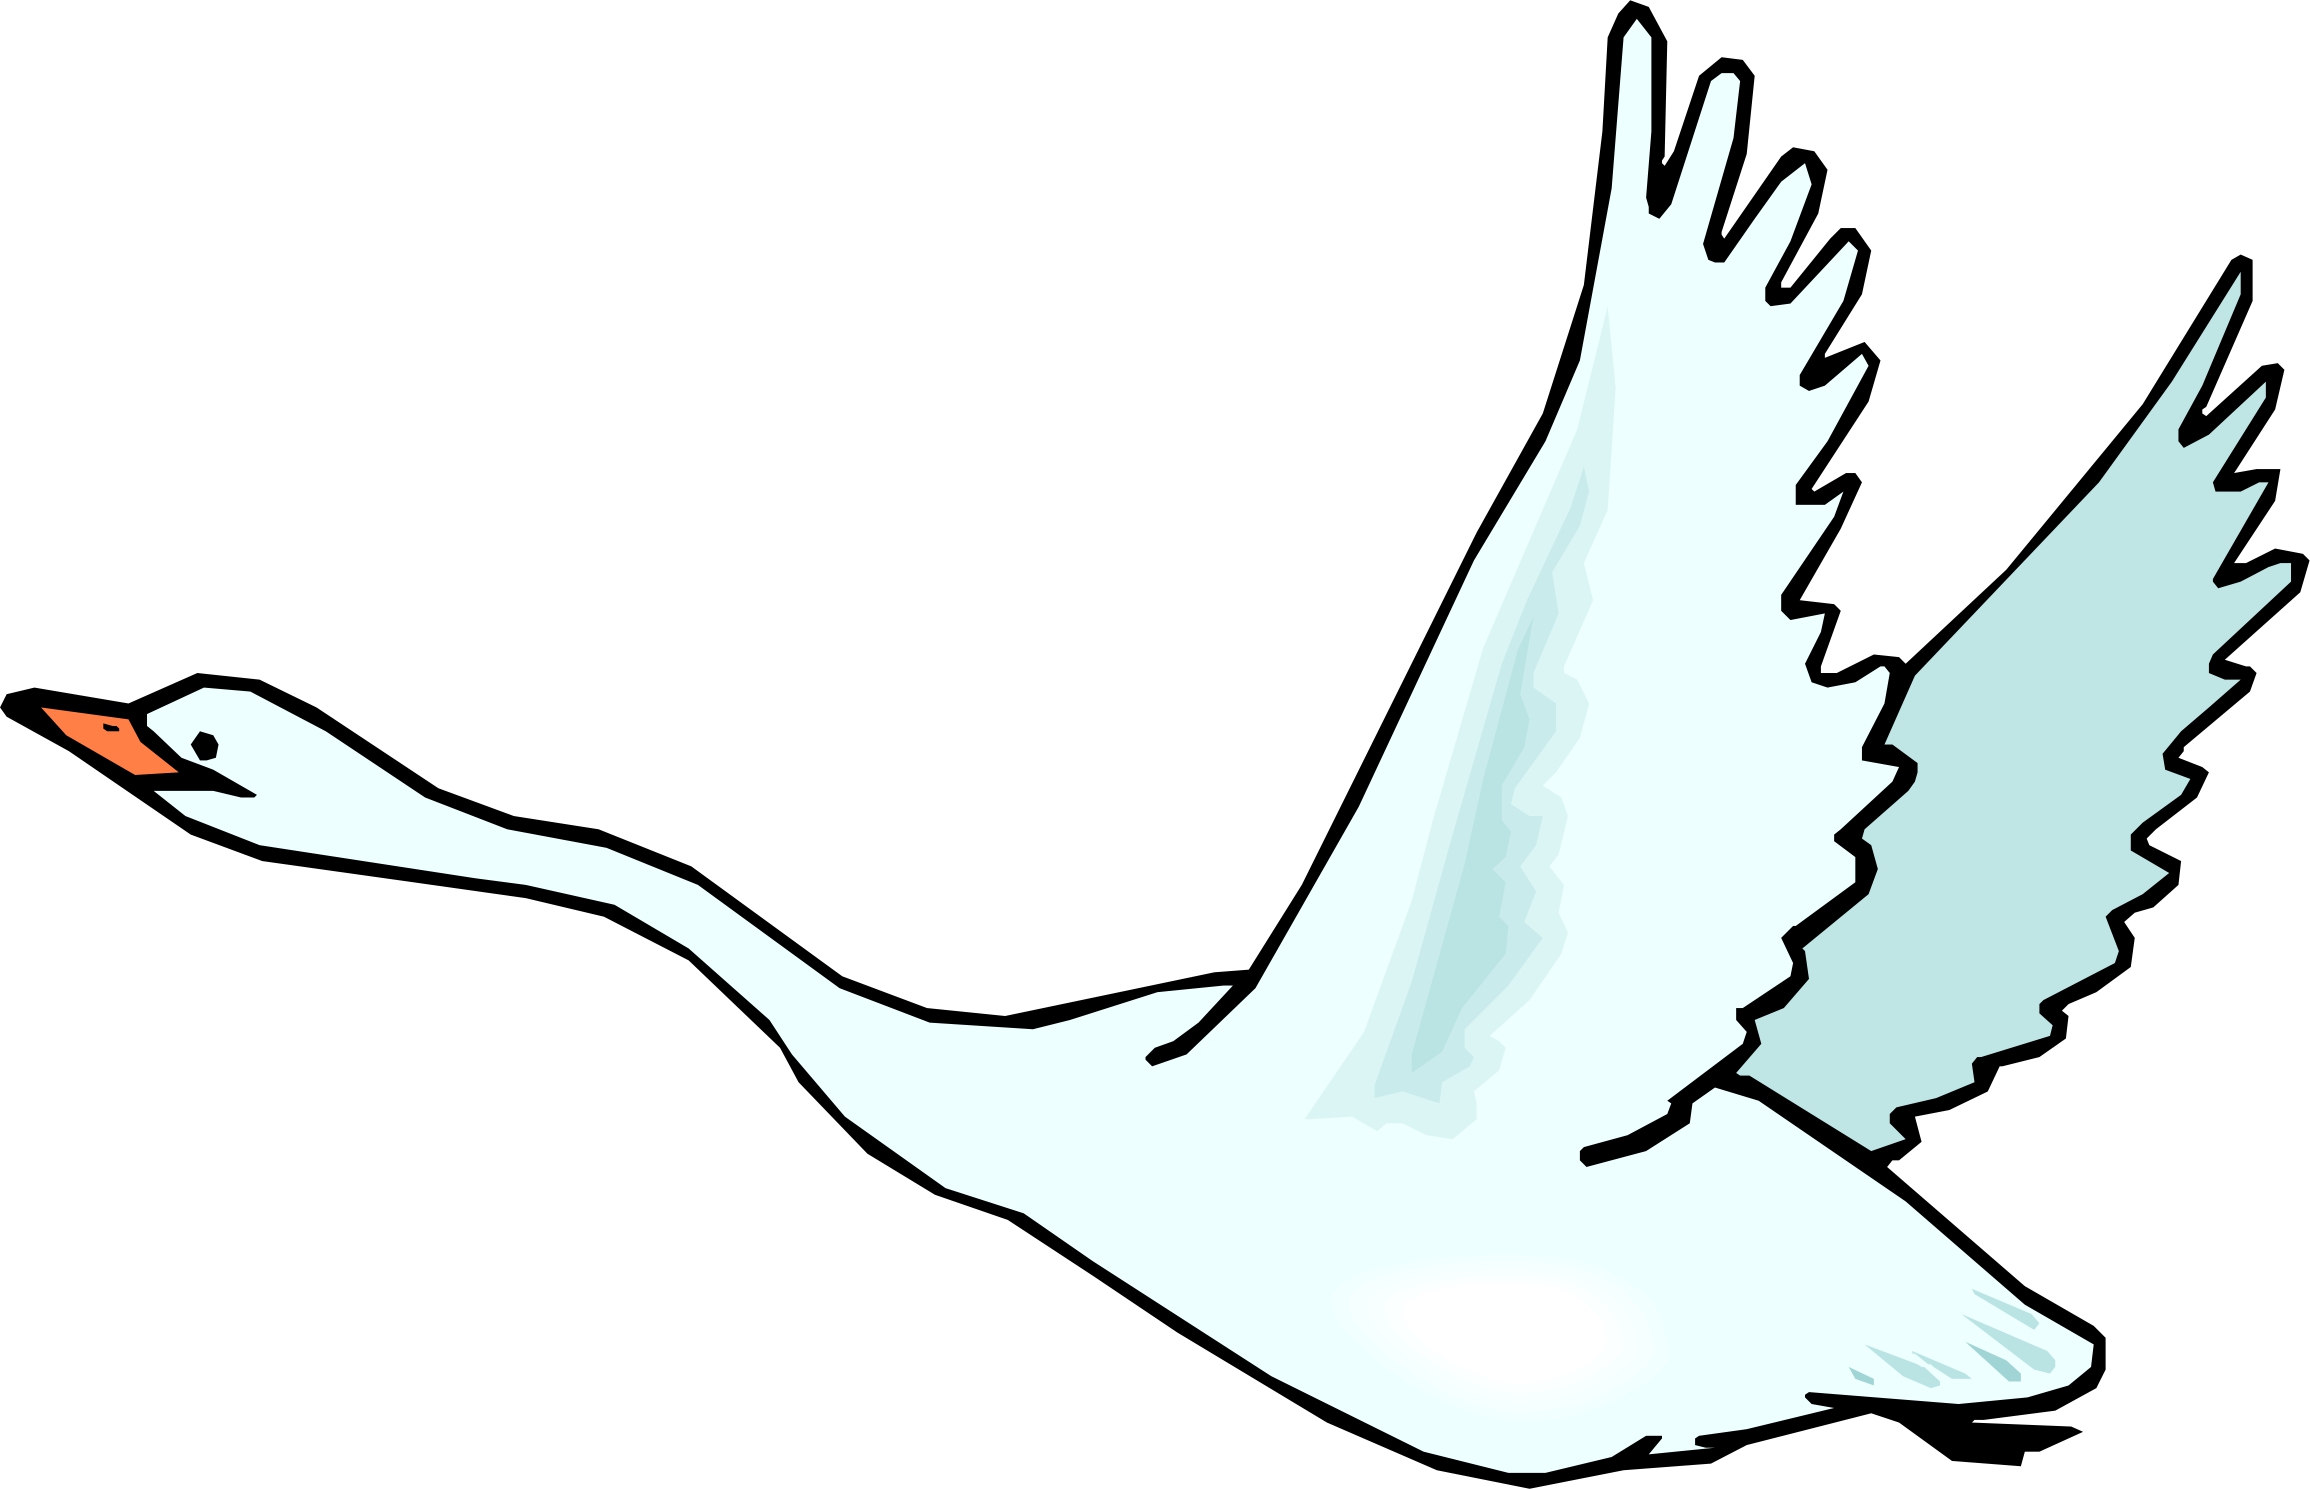 silly goose clipart - photo #44